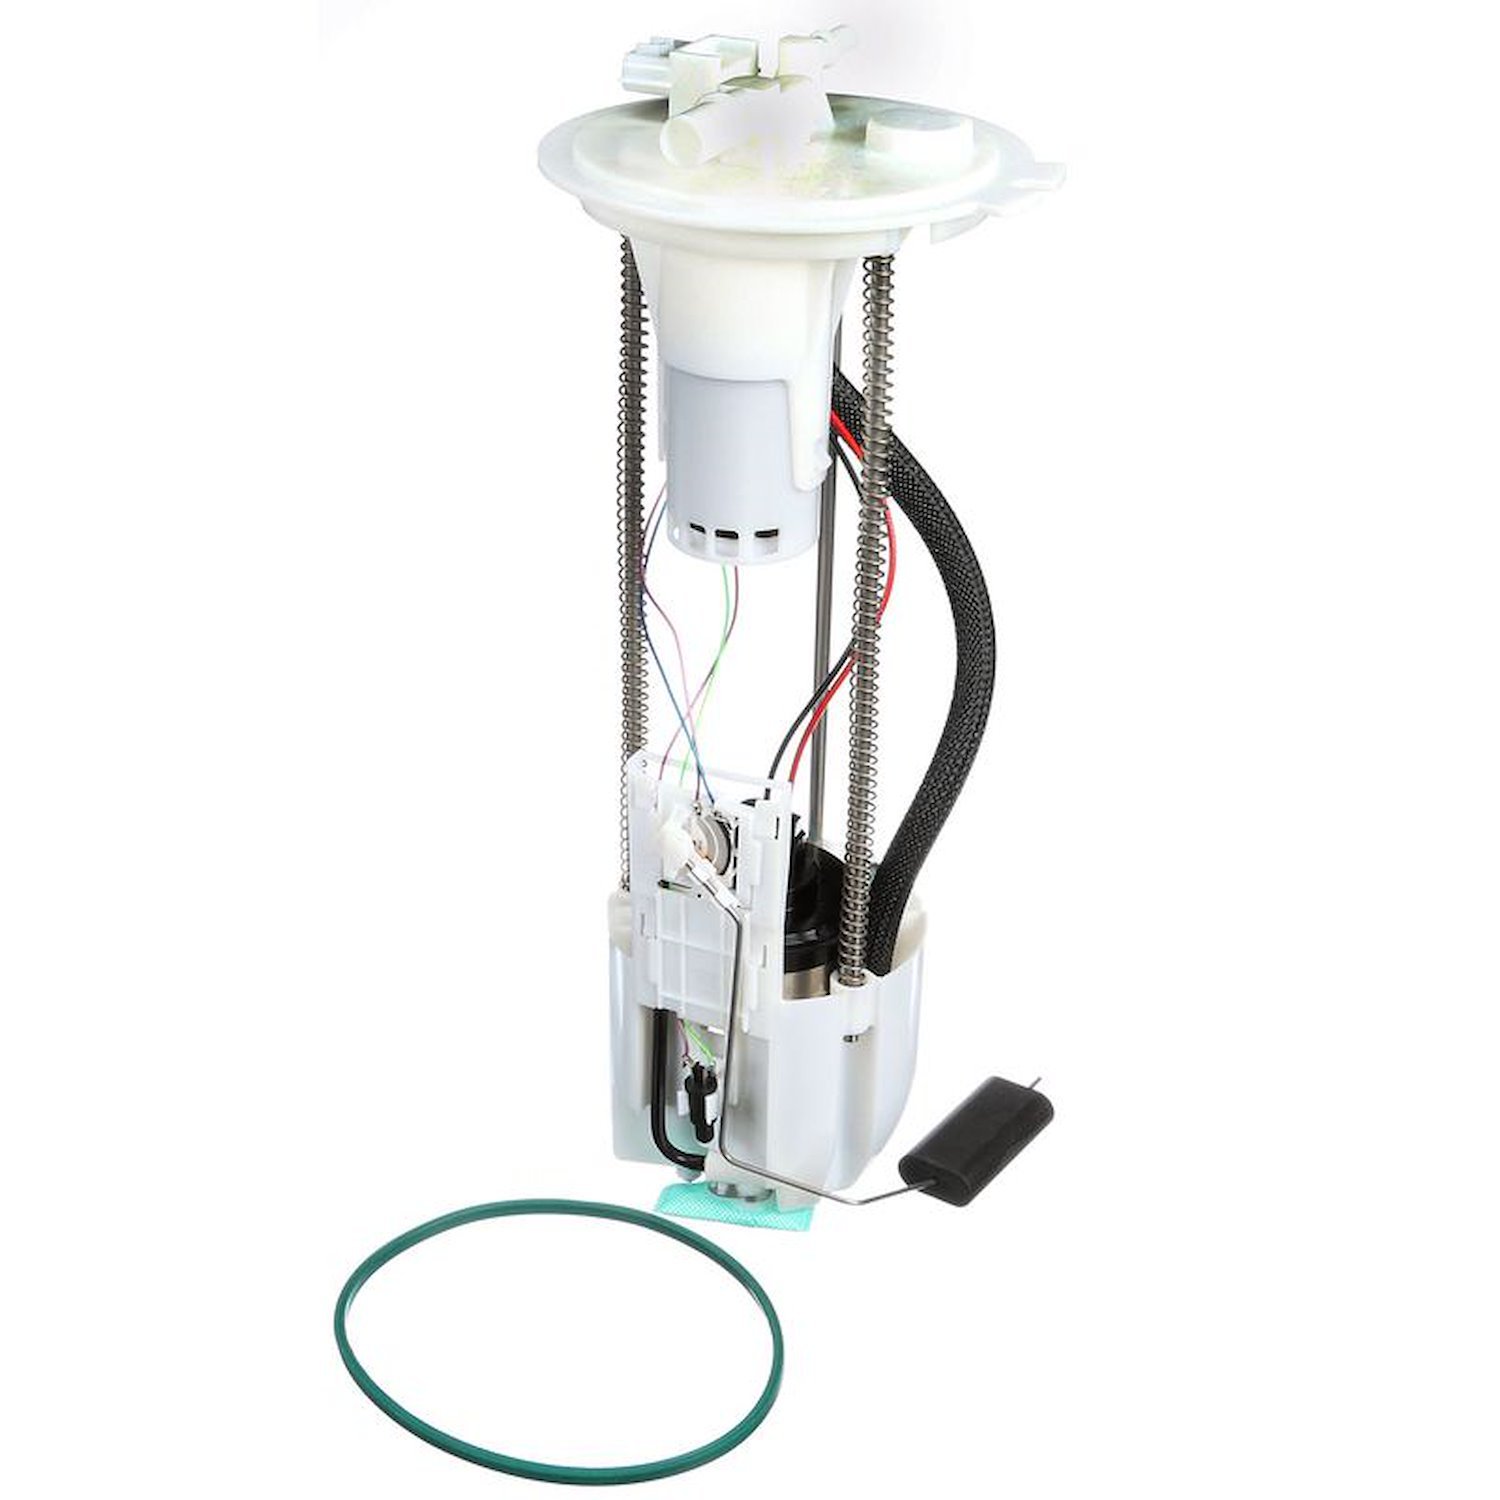 OE Replacement Fuel Pump Module Assembly for 2004-2006 Nissan Titan/Infiniti QX56/2005-2006 Nissan Armada